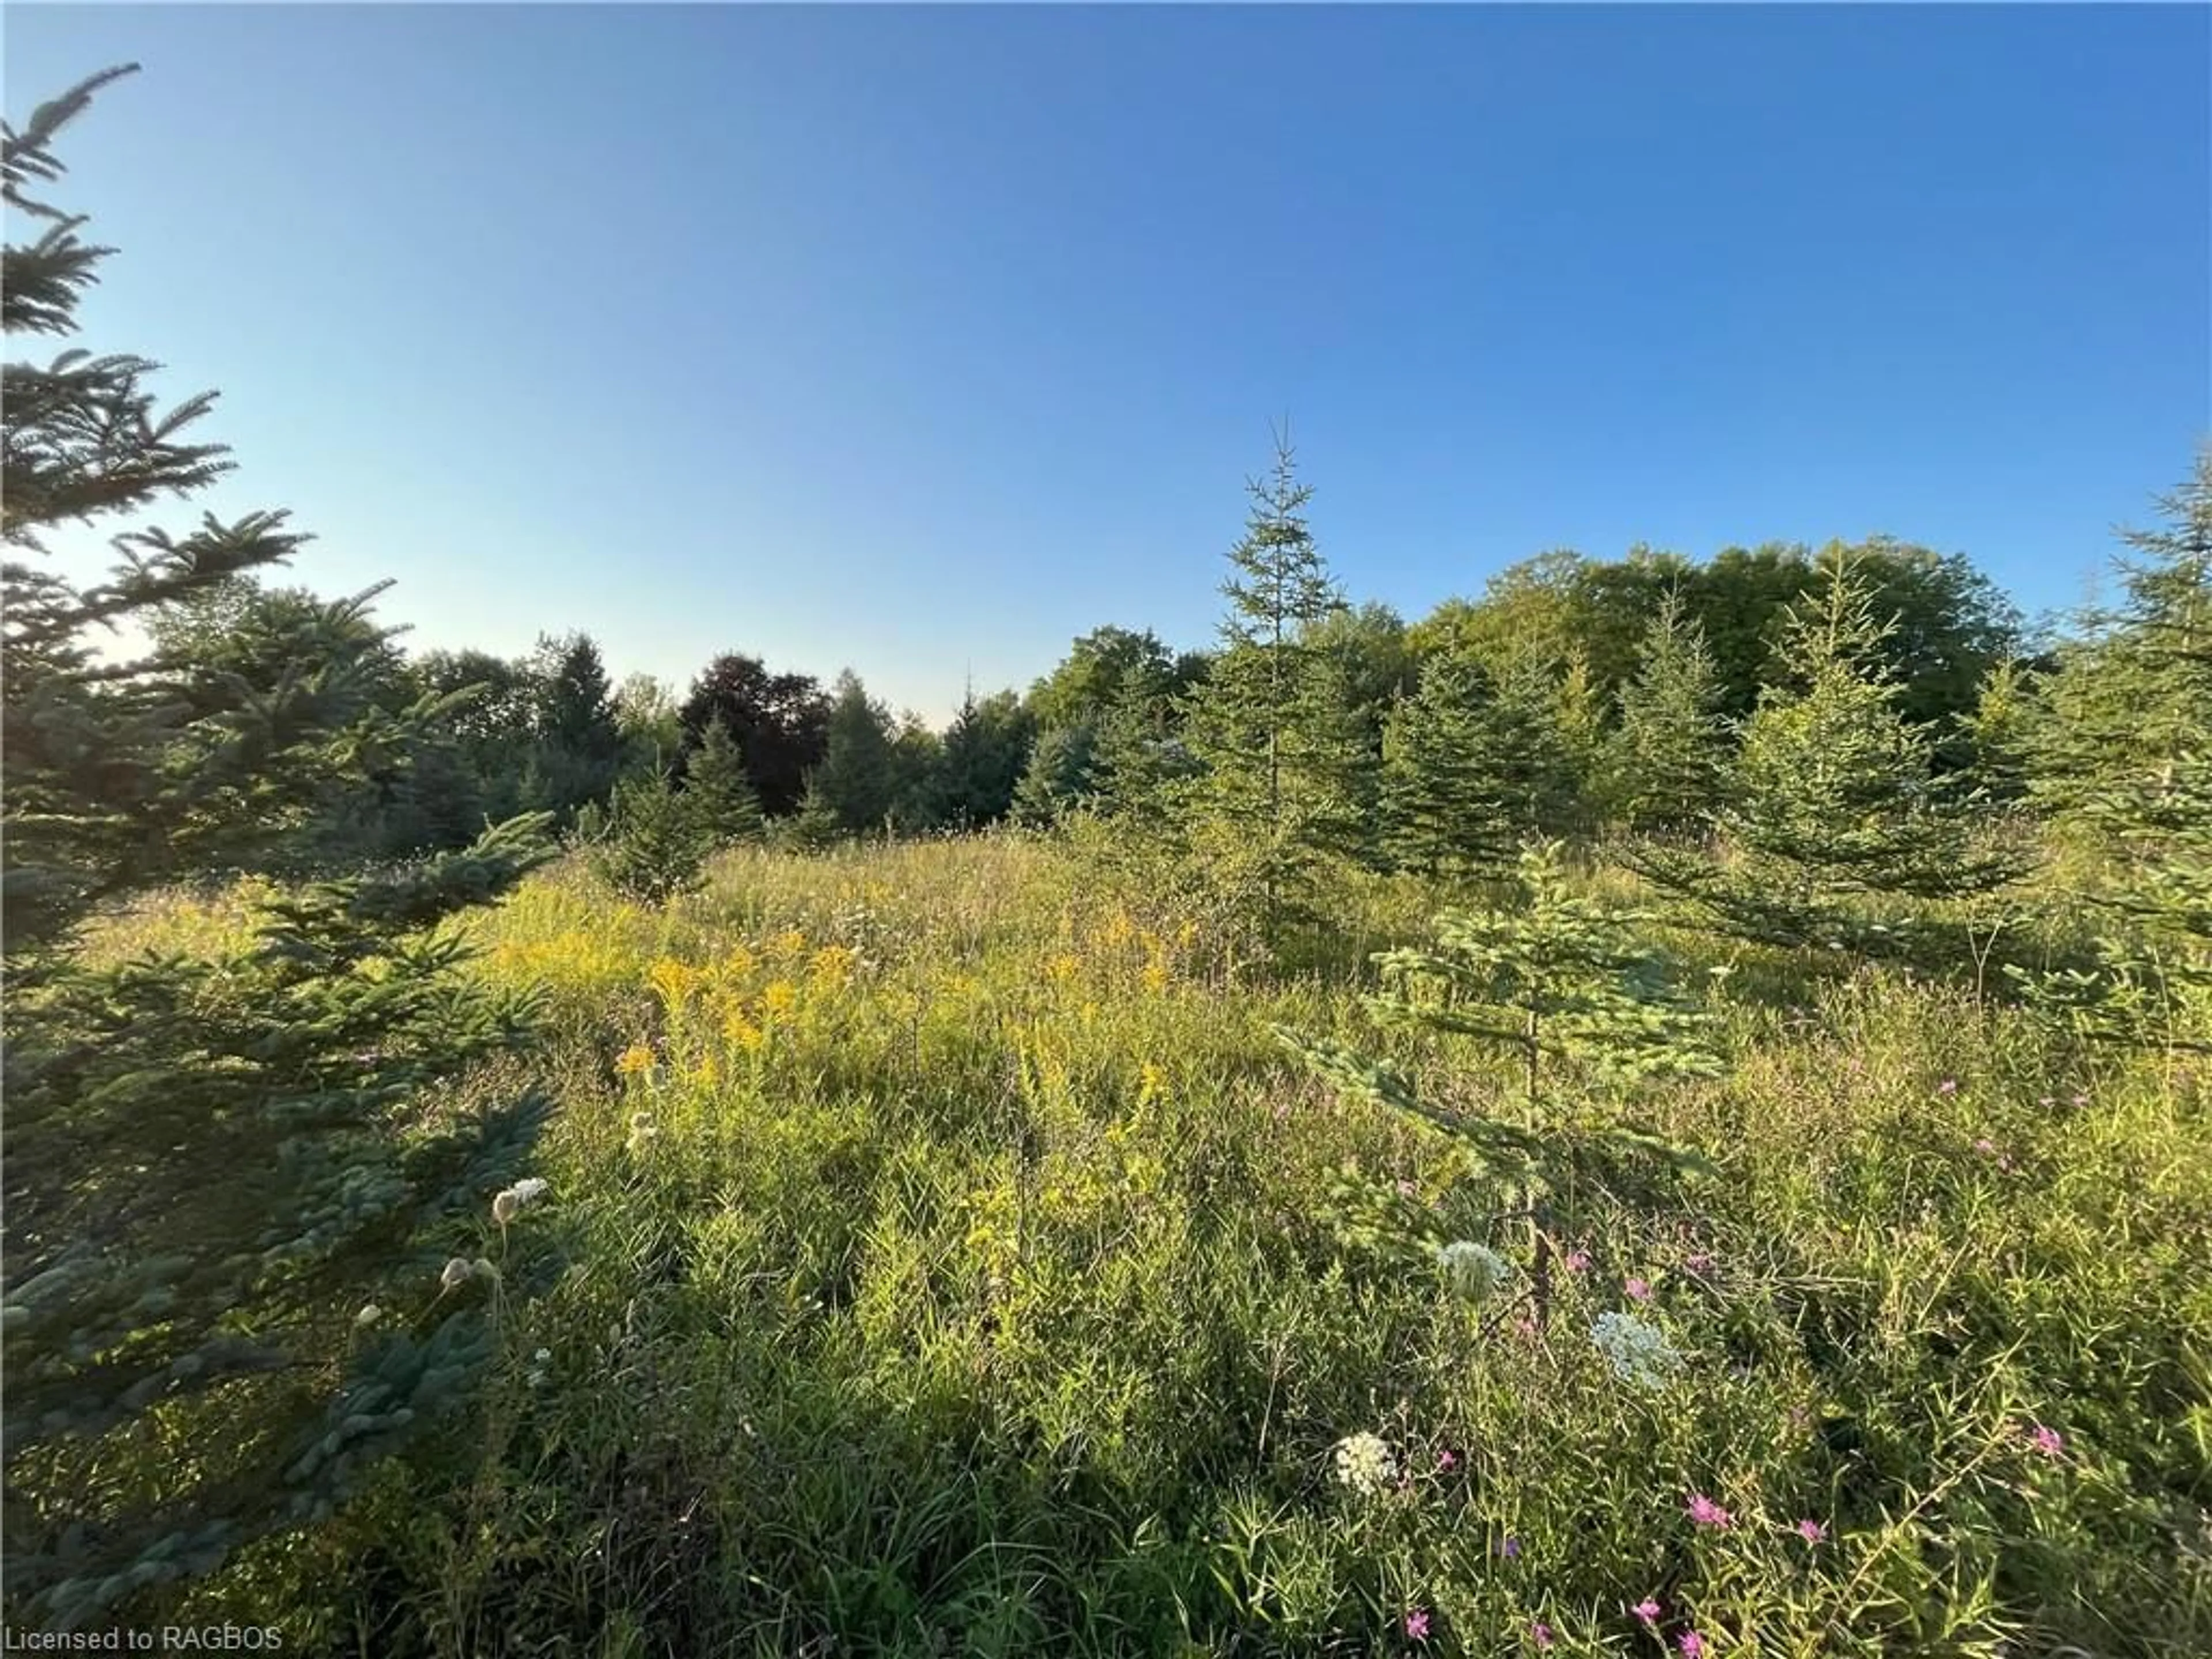 Forest view for 395807 Concession 2 Rd, Chatsworth (Twp) Ontario N0H 1R0